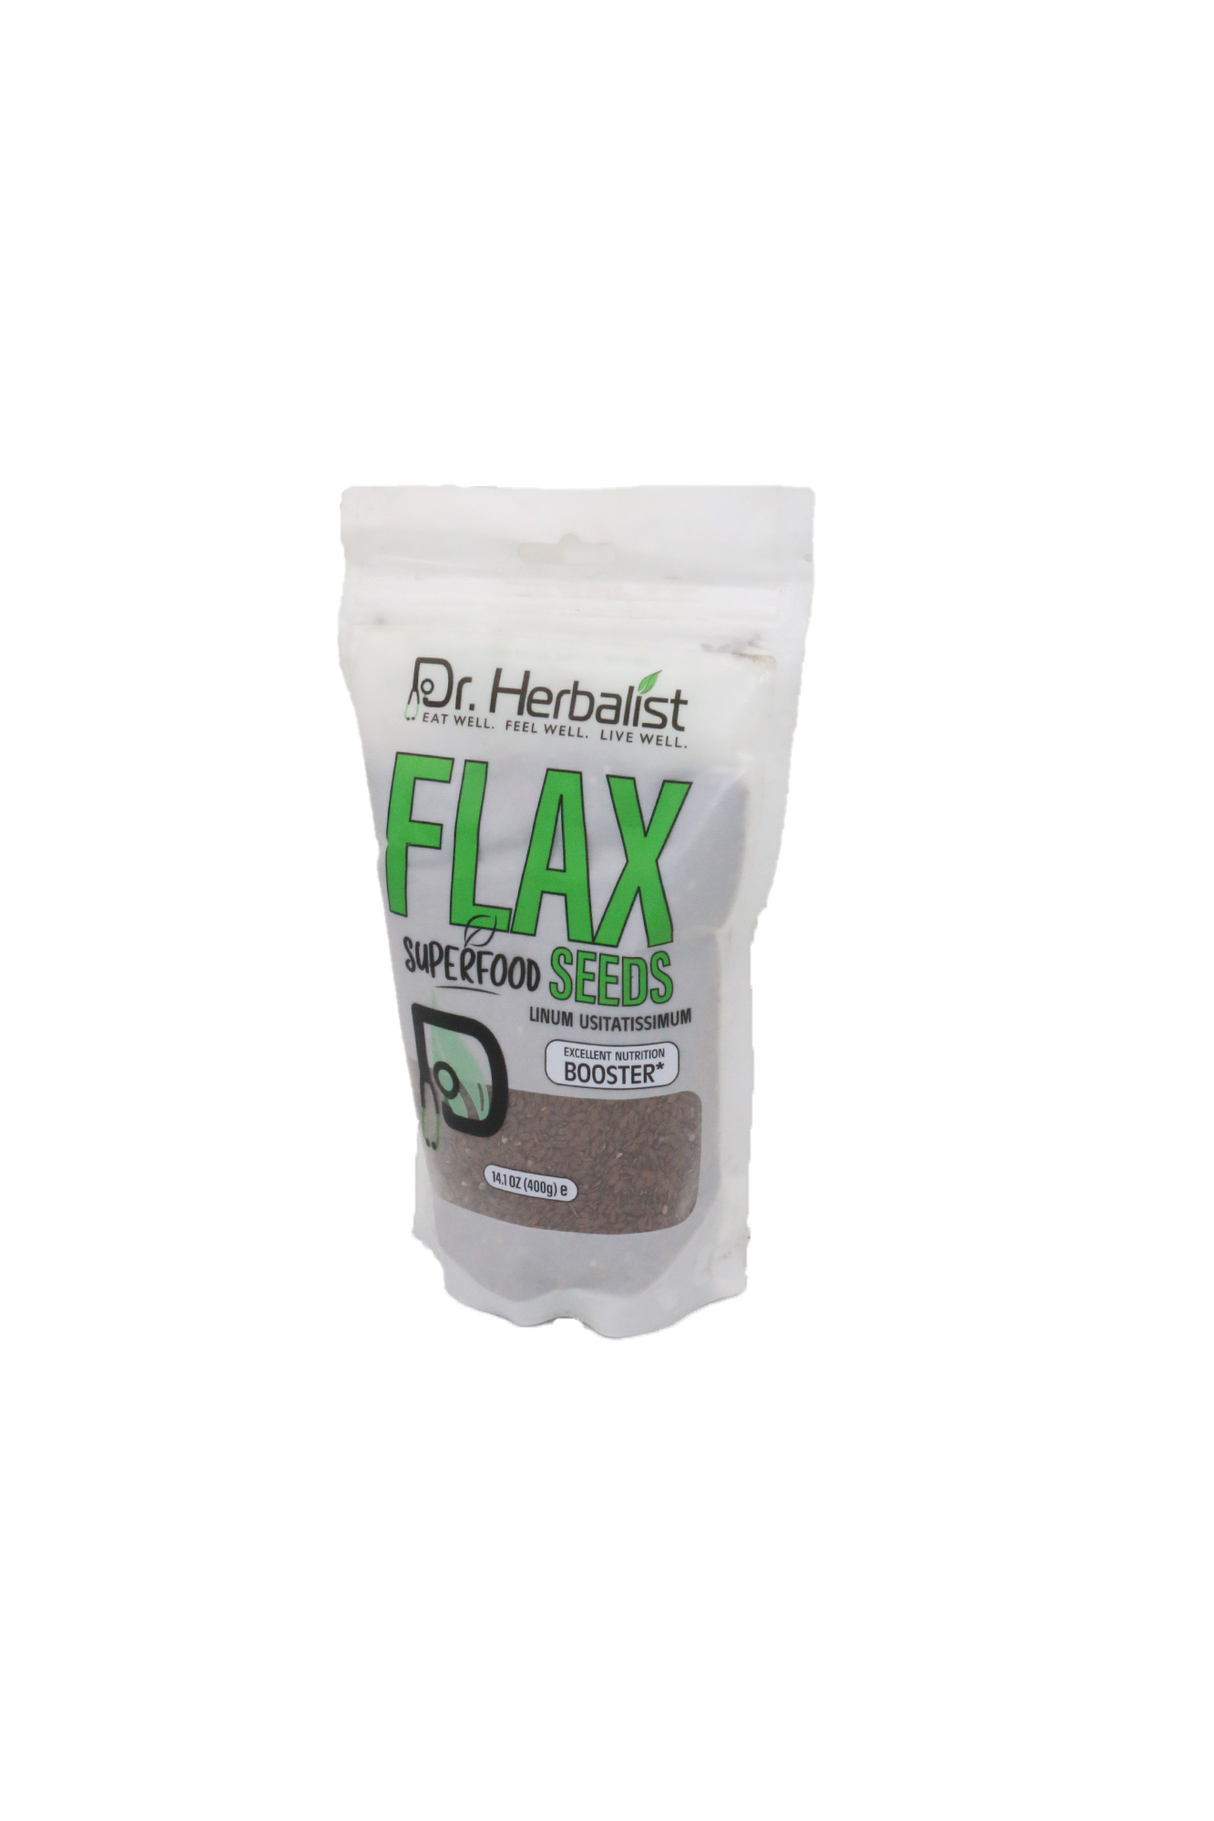 dr herbalist flax seeds 400g pouch